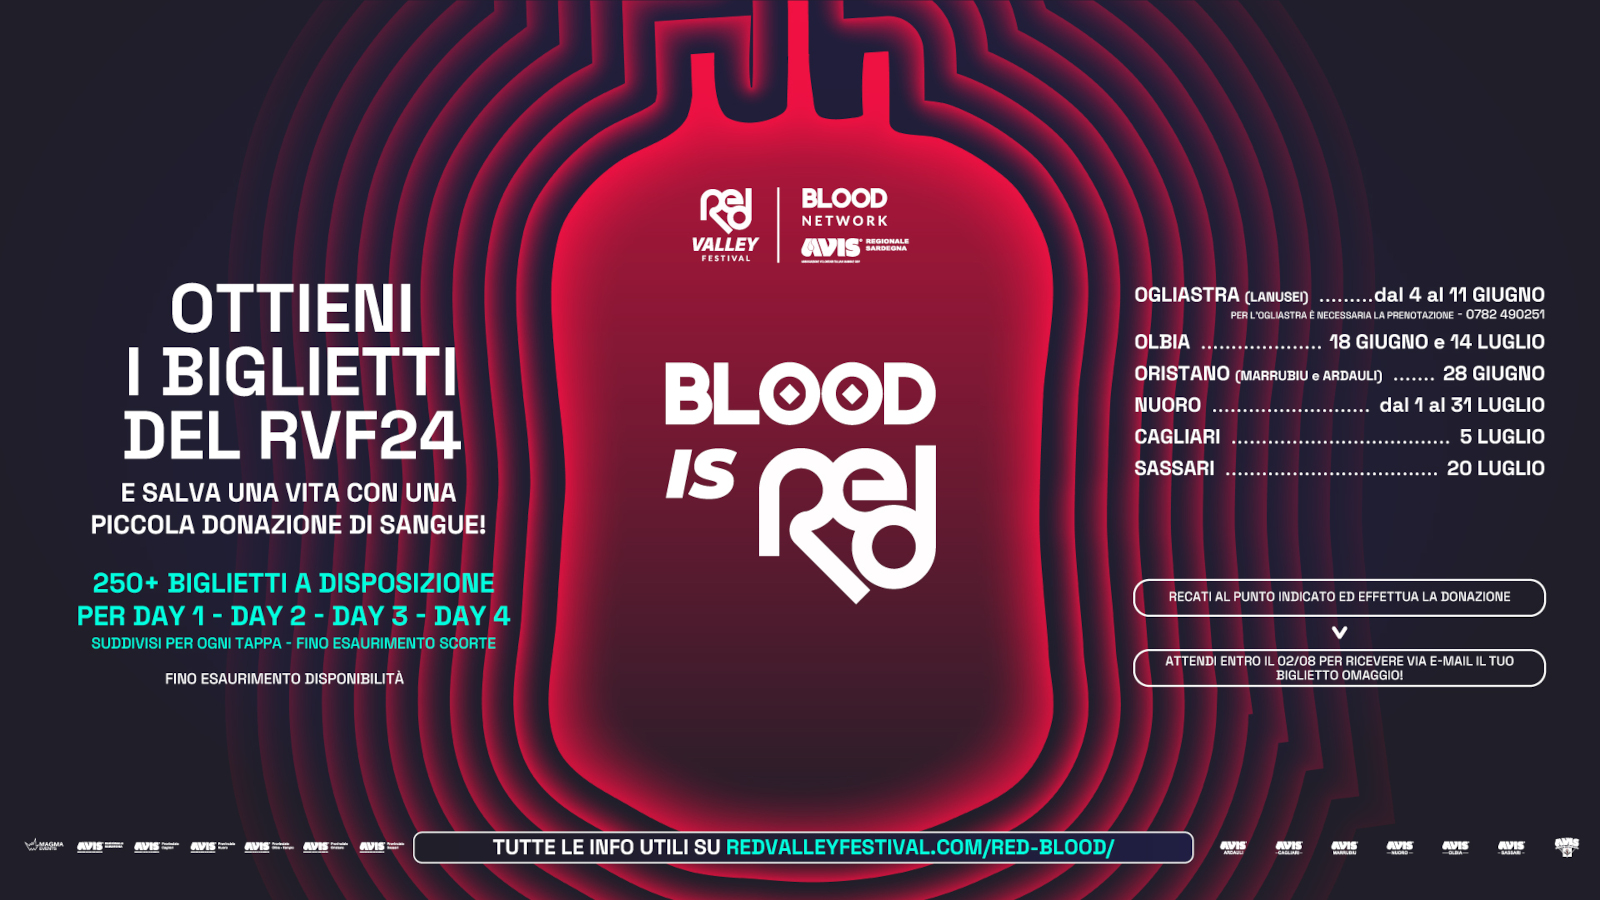 RED BLOOD NETWORK